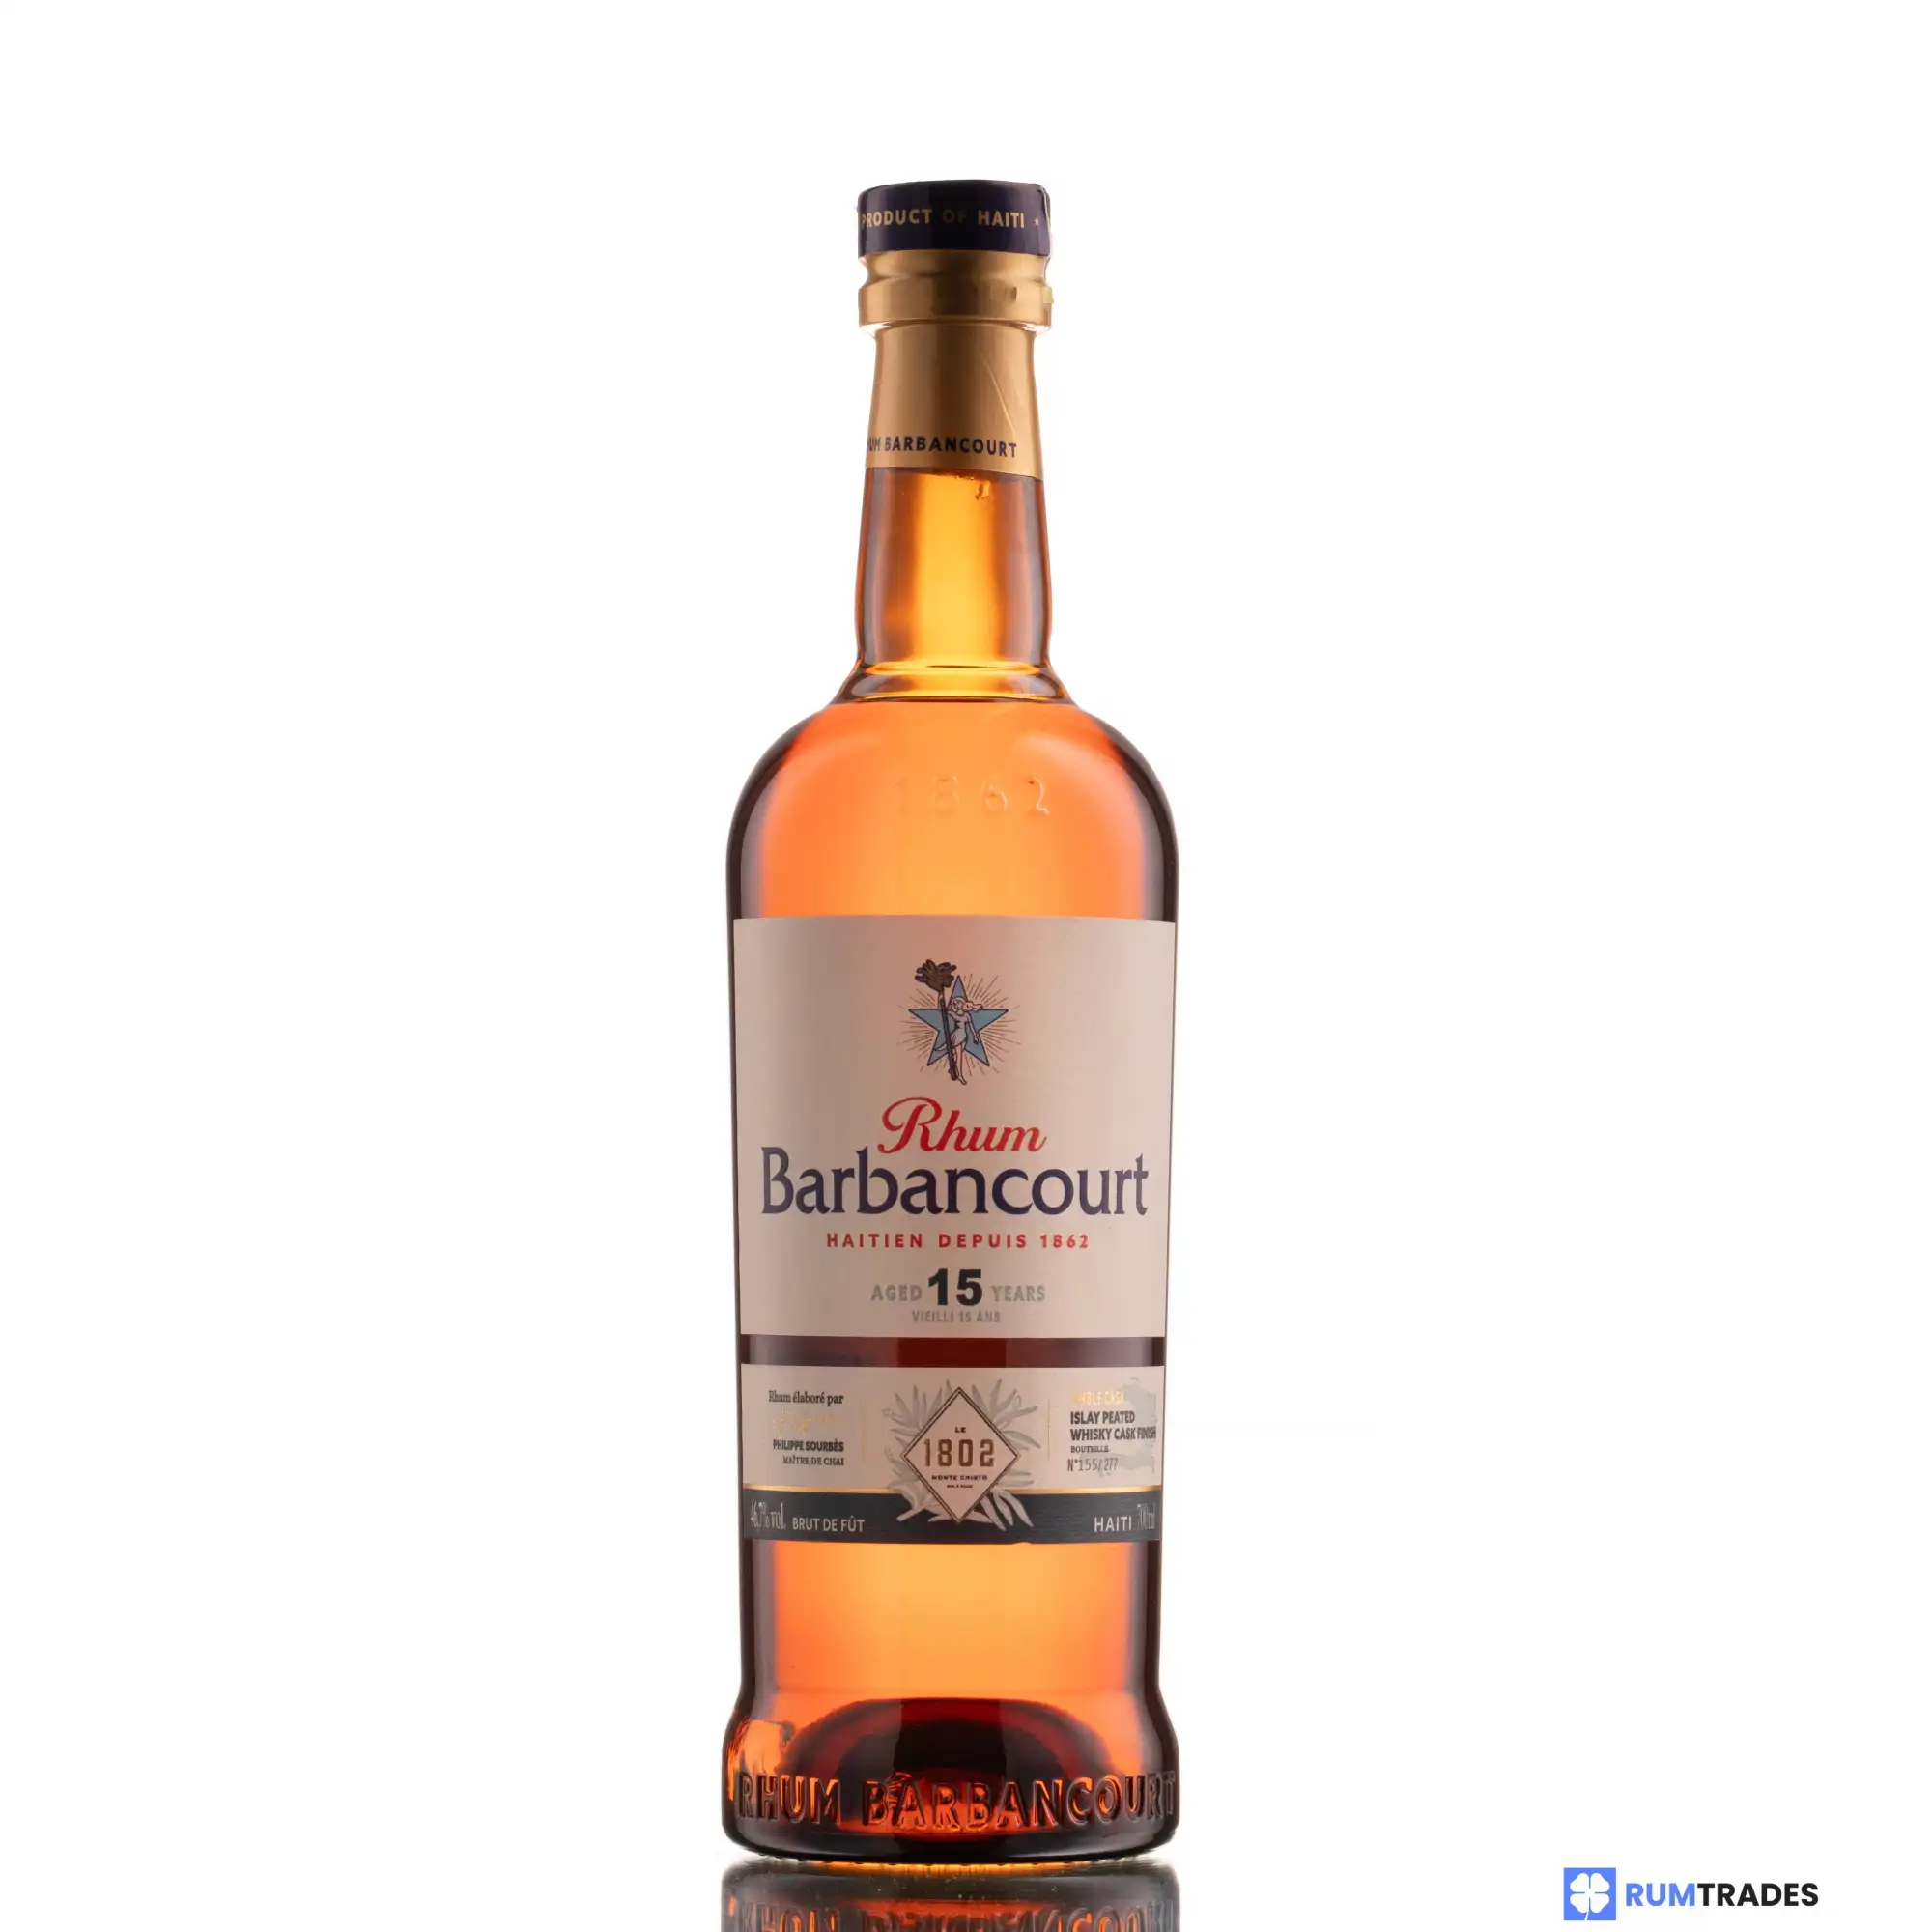 Image of the front of the bottle of the rum Barbancourt